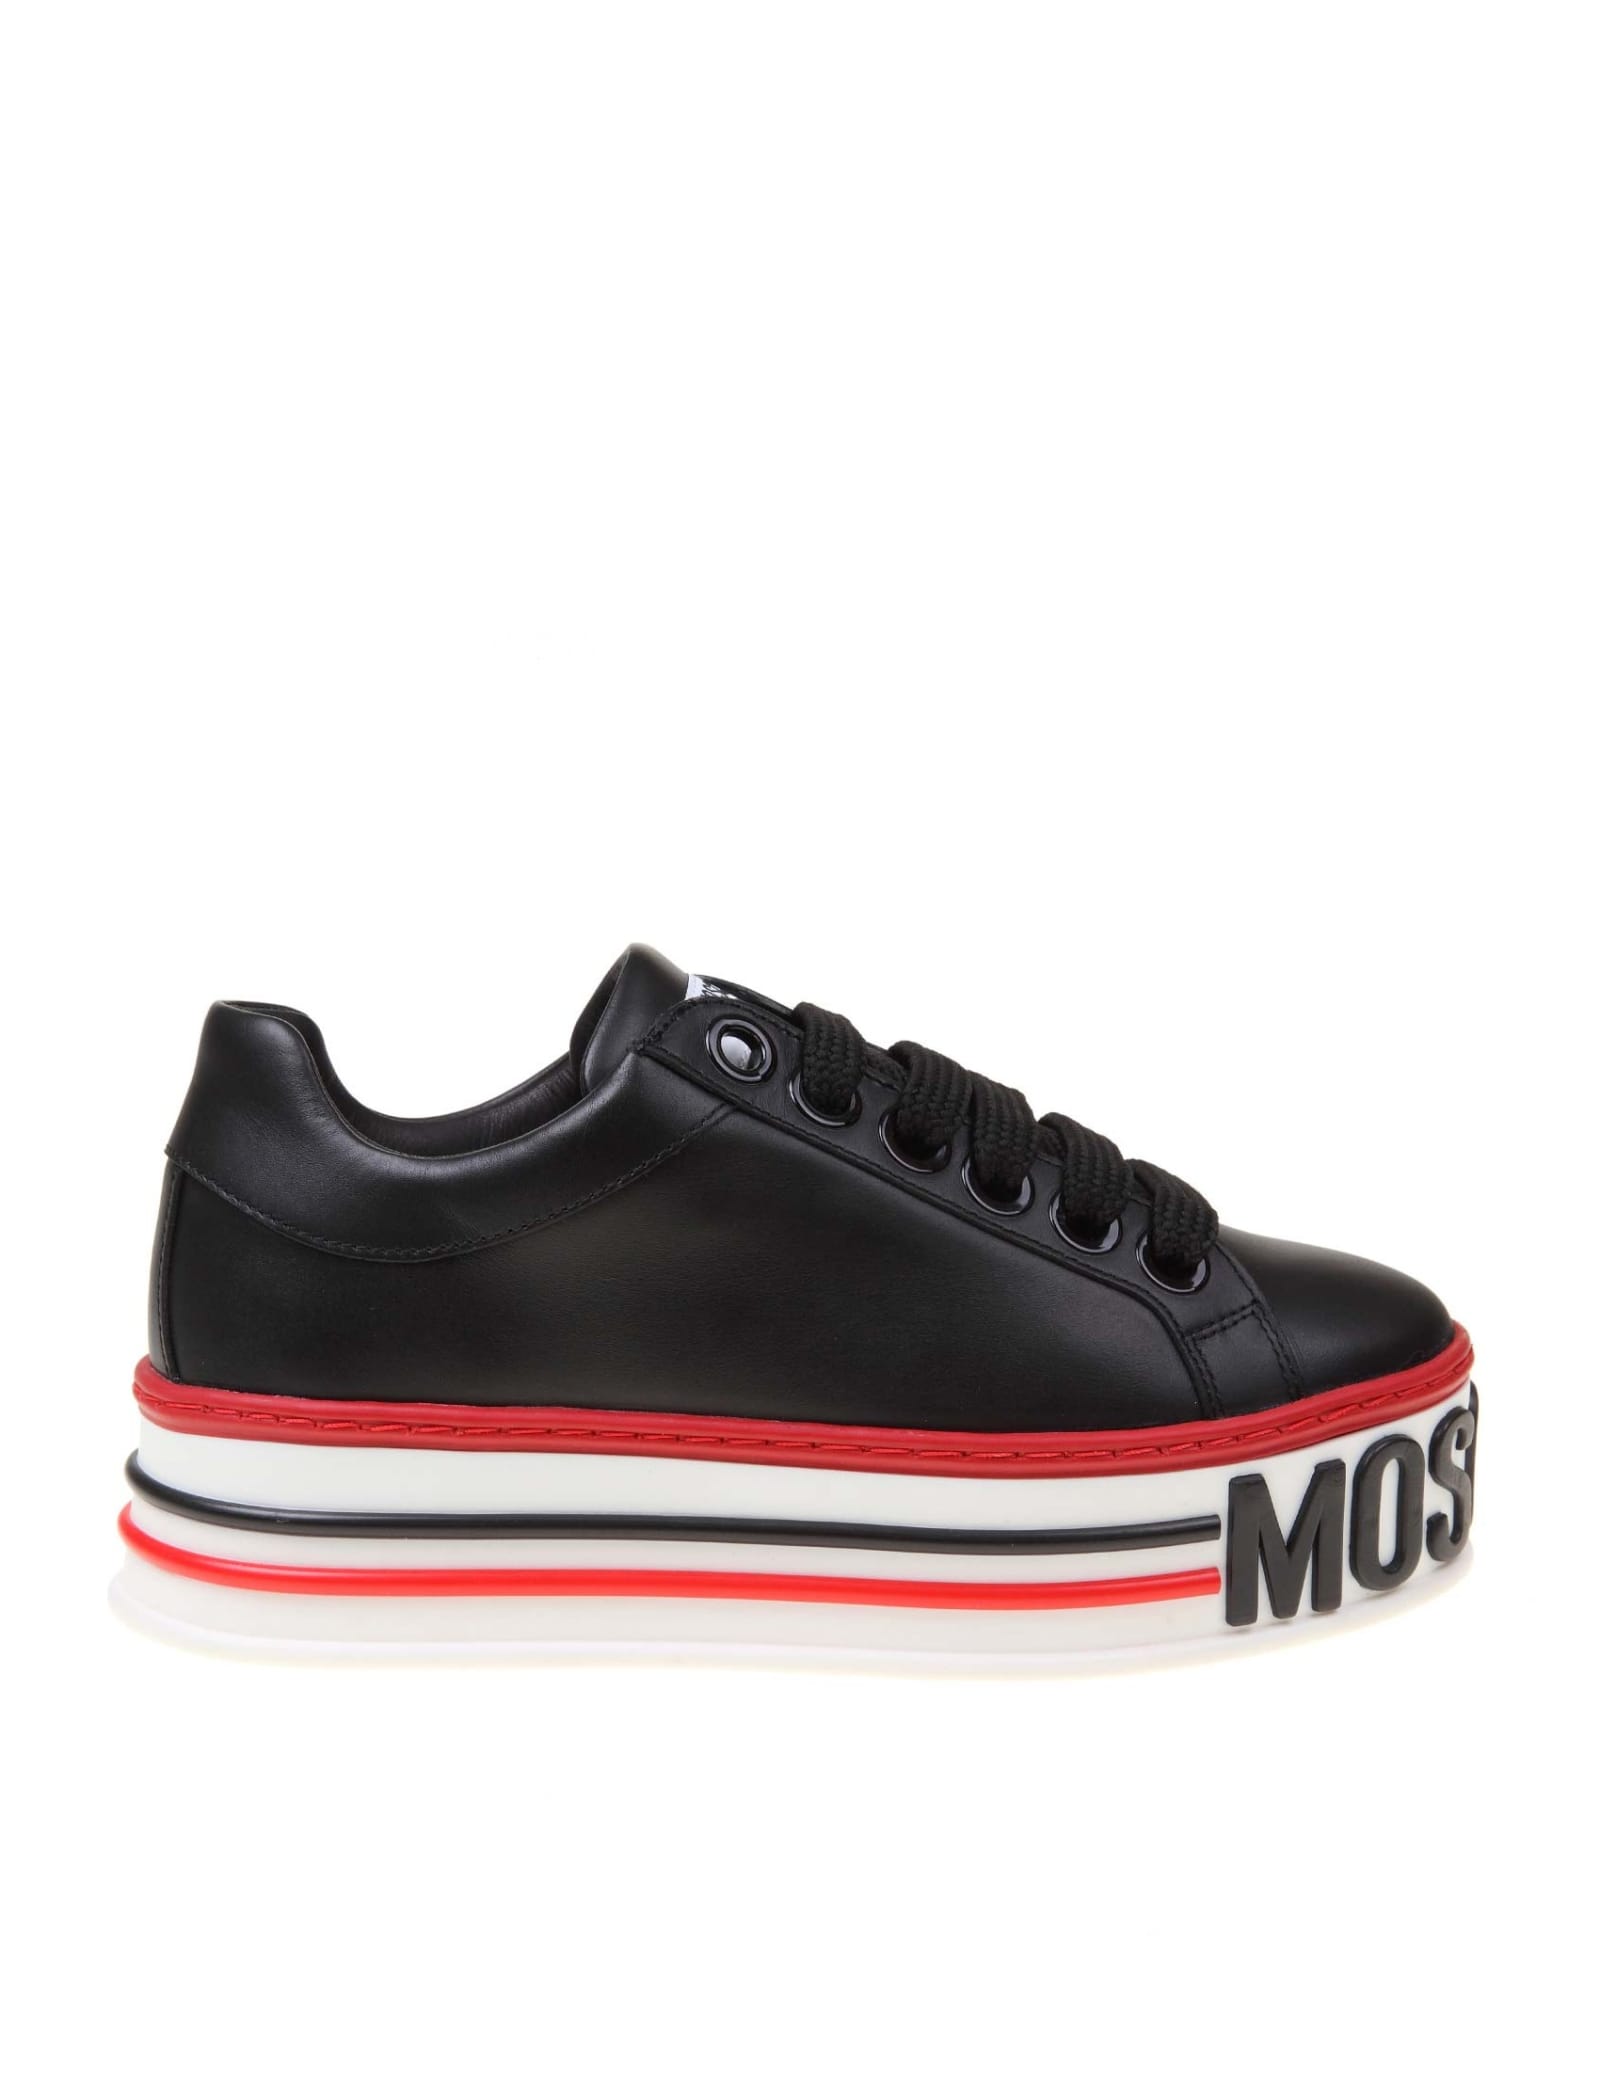 Buy Moschino Platform Sneakers In Black Leather online, shop Moschino shoes with free shipping